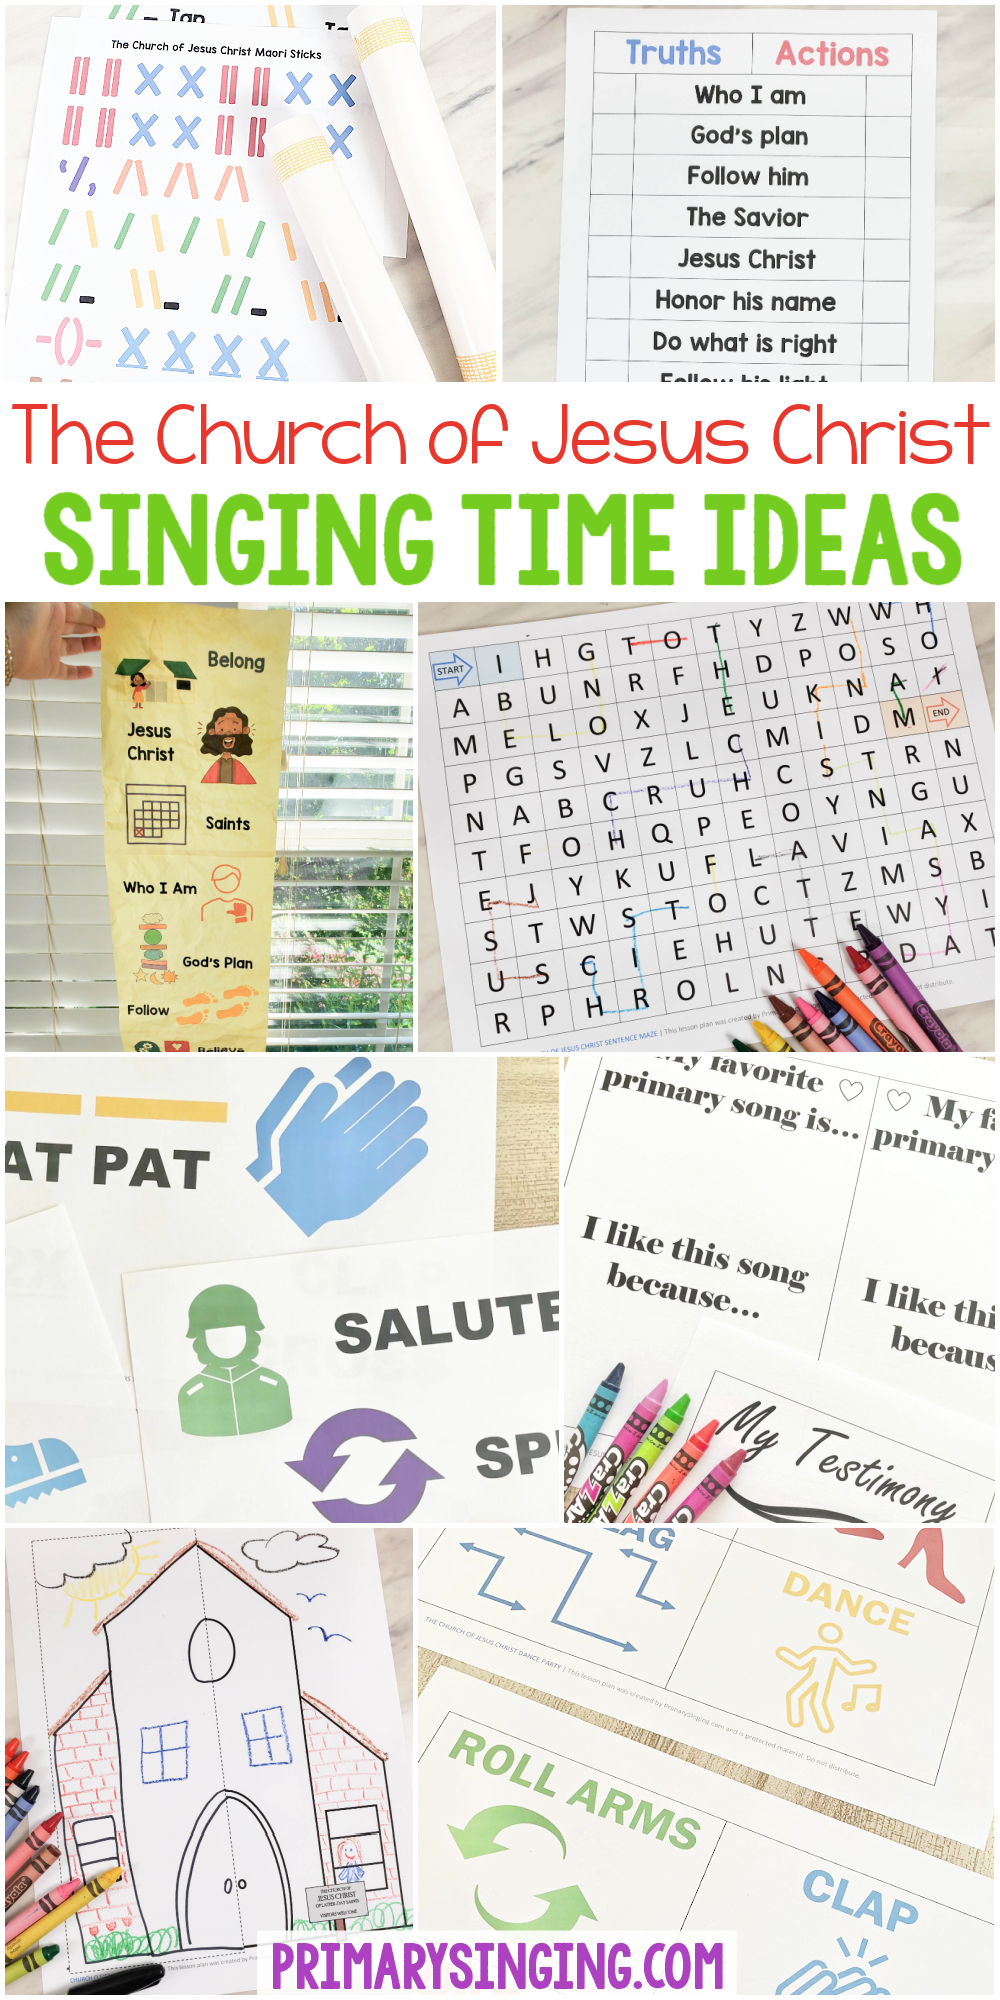 The Church of Jesus Christ Singing Time Ideas lots of fun ways to teach this LDS Primary song including sentence maze, song scroll, maori sticks, song testimony, rhythm partners, draw the chapel and more! Great resource for Primary music leaders teaching this song as part of the New Testament Come Follow Me.